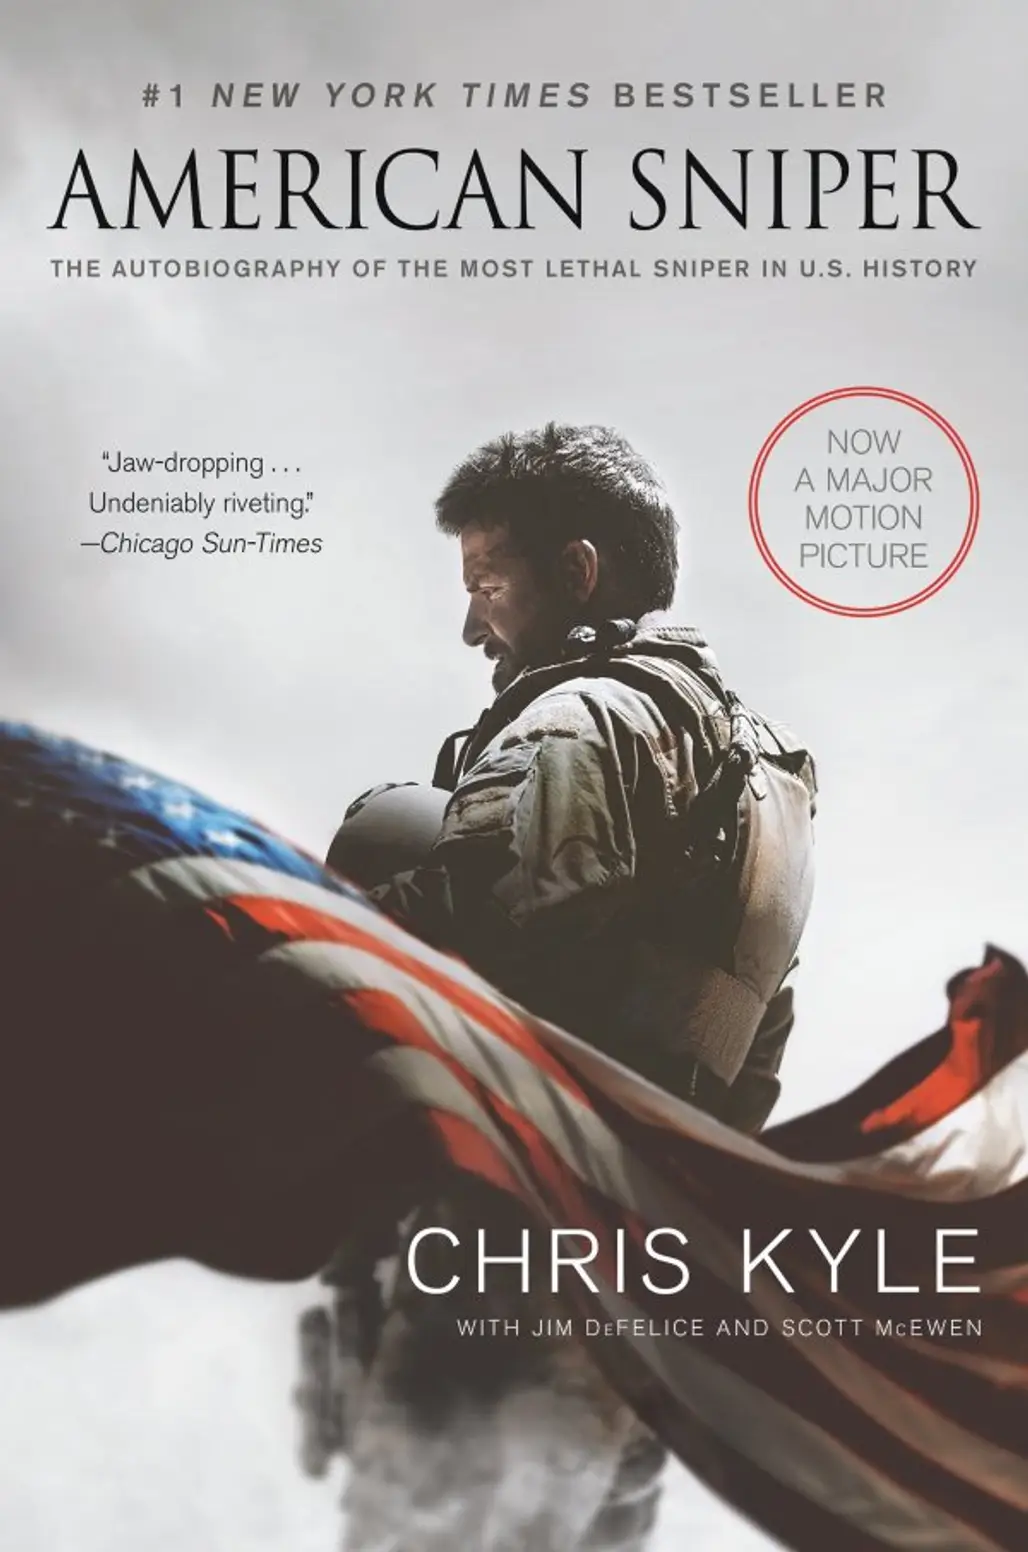 American Sniper by Chris Kyle